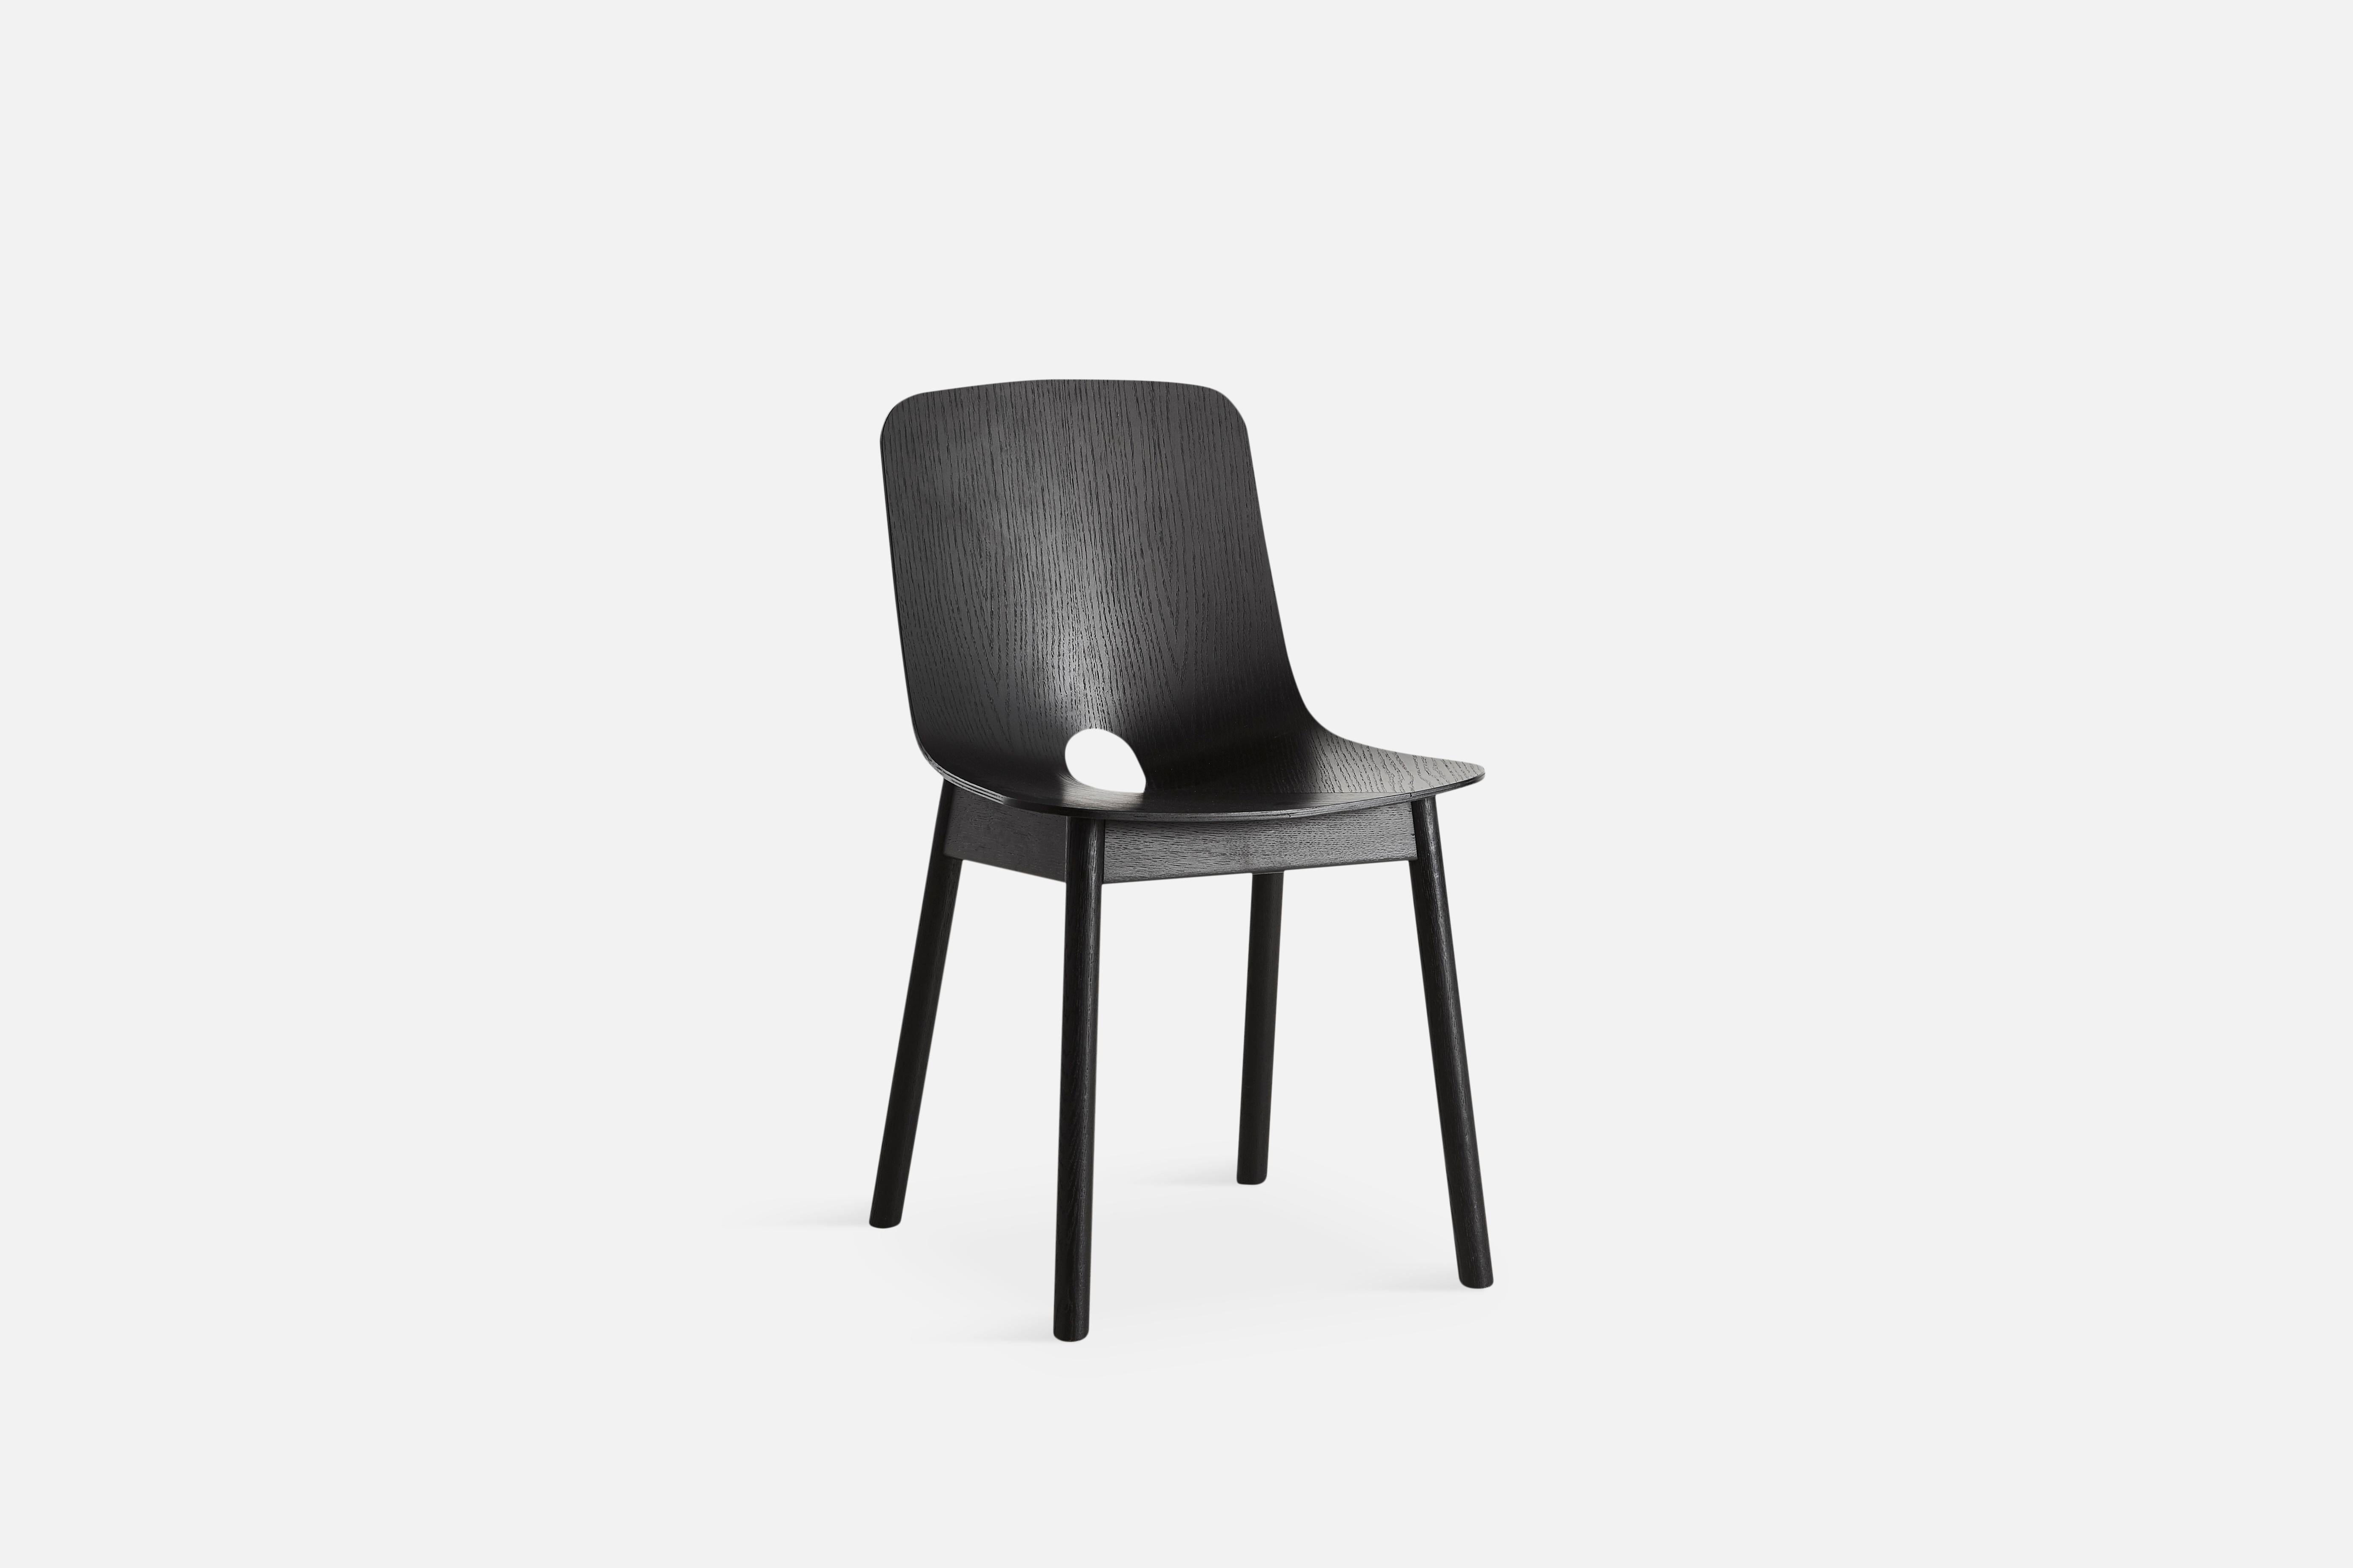 Mono black dining chair by Kasper Nyman
Materials: Solid Oak, Oak Venner
Dimensions: D 51 x W 45 x H 78 cm

Woud
The founders, Mia and Torben Koed, decided to put their 30 years of experience into a new project. It was time for a change and a